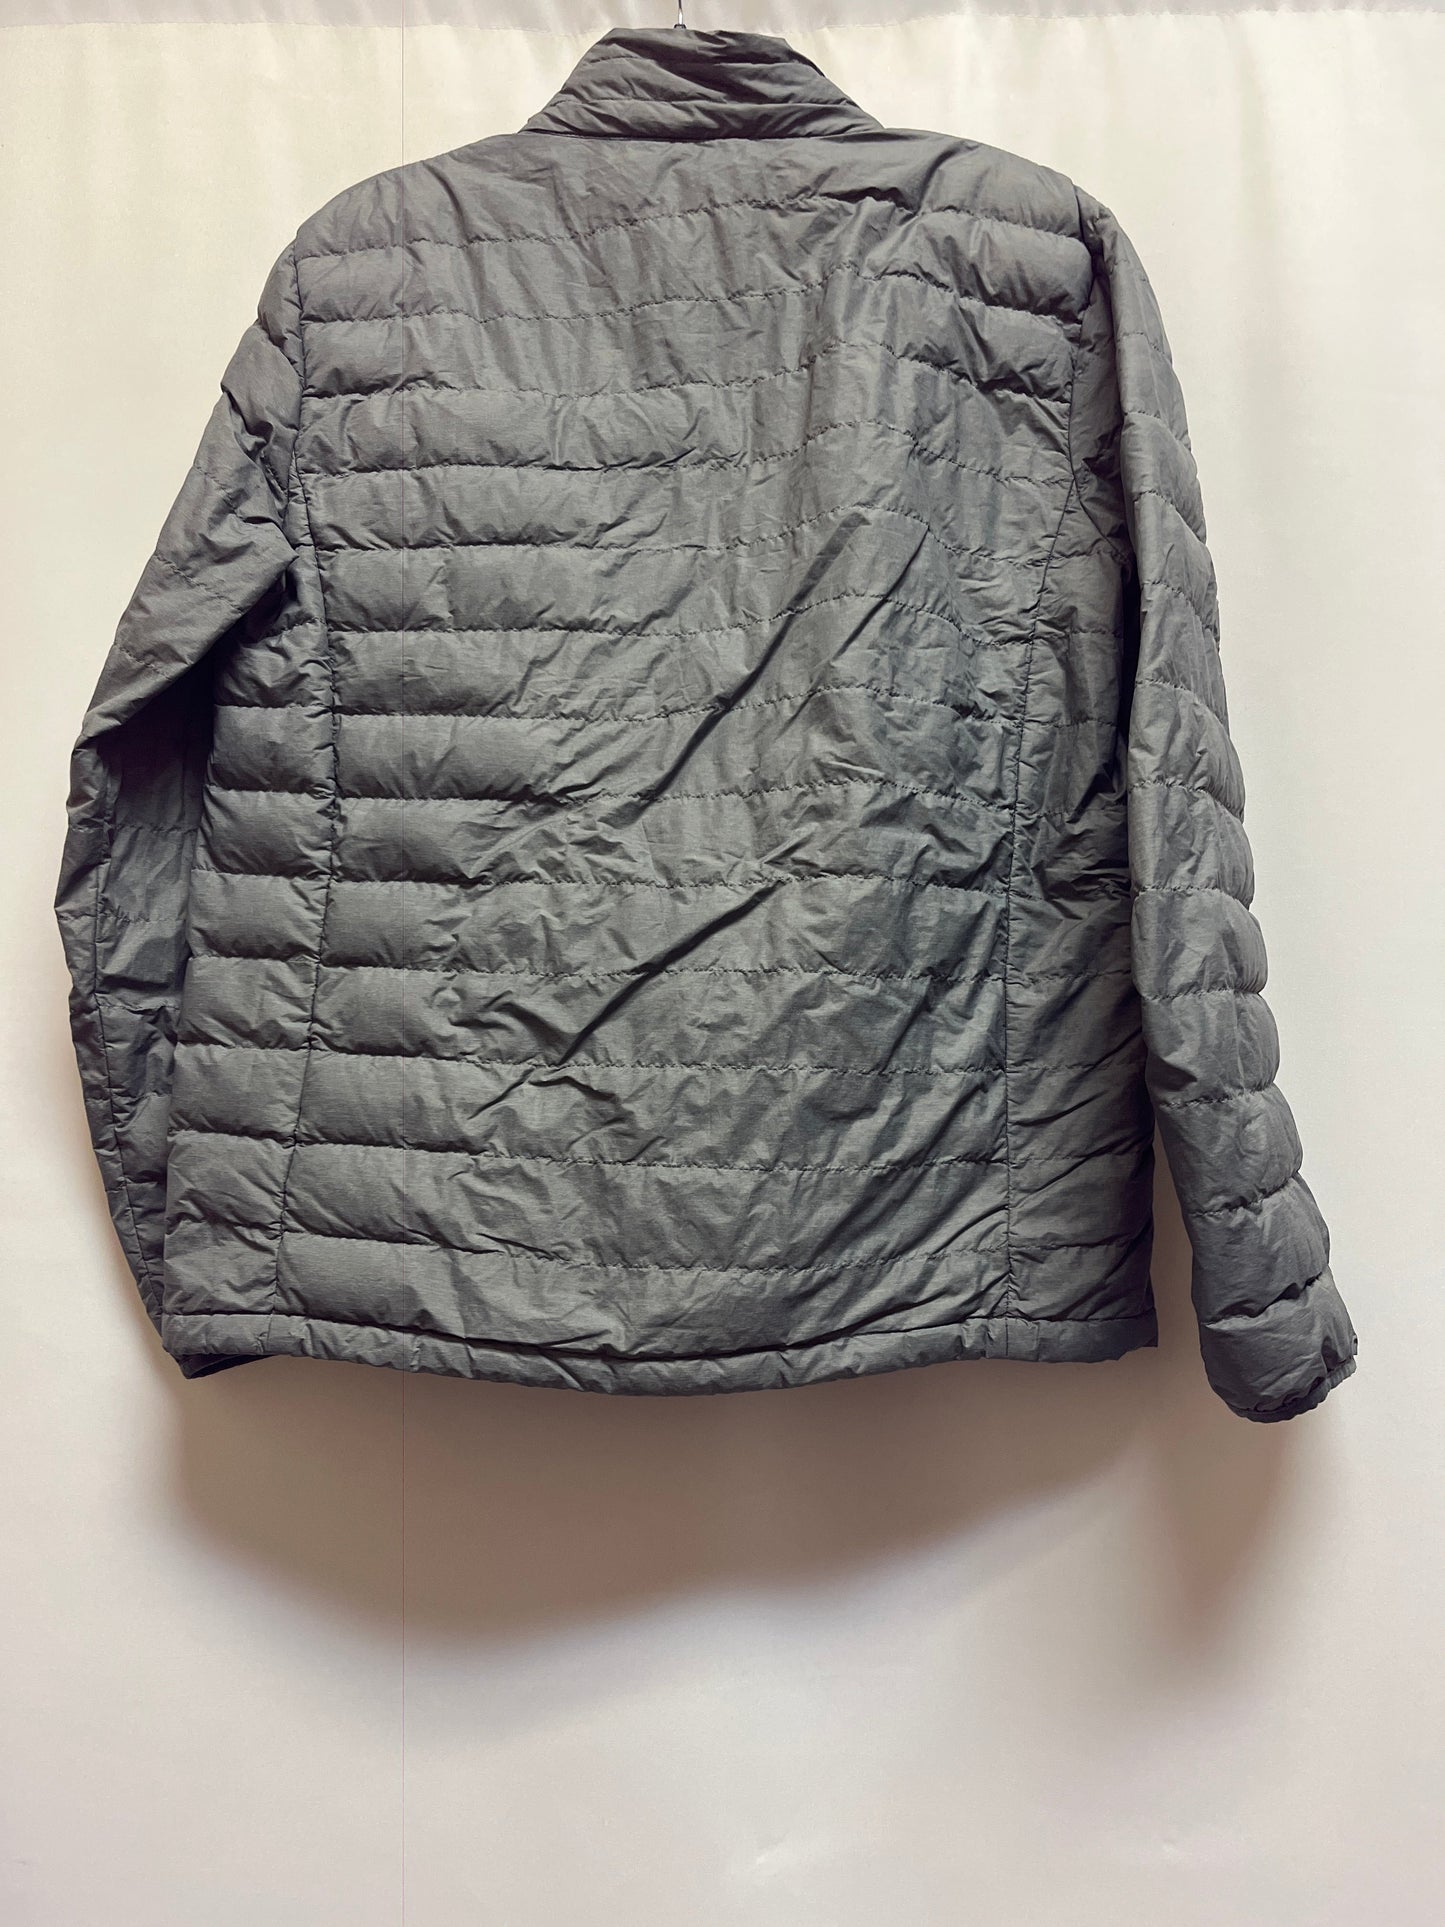 Coat Puffer & Quilted By 32 Degrees  Size: S